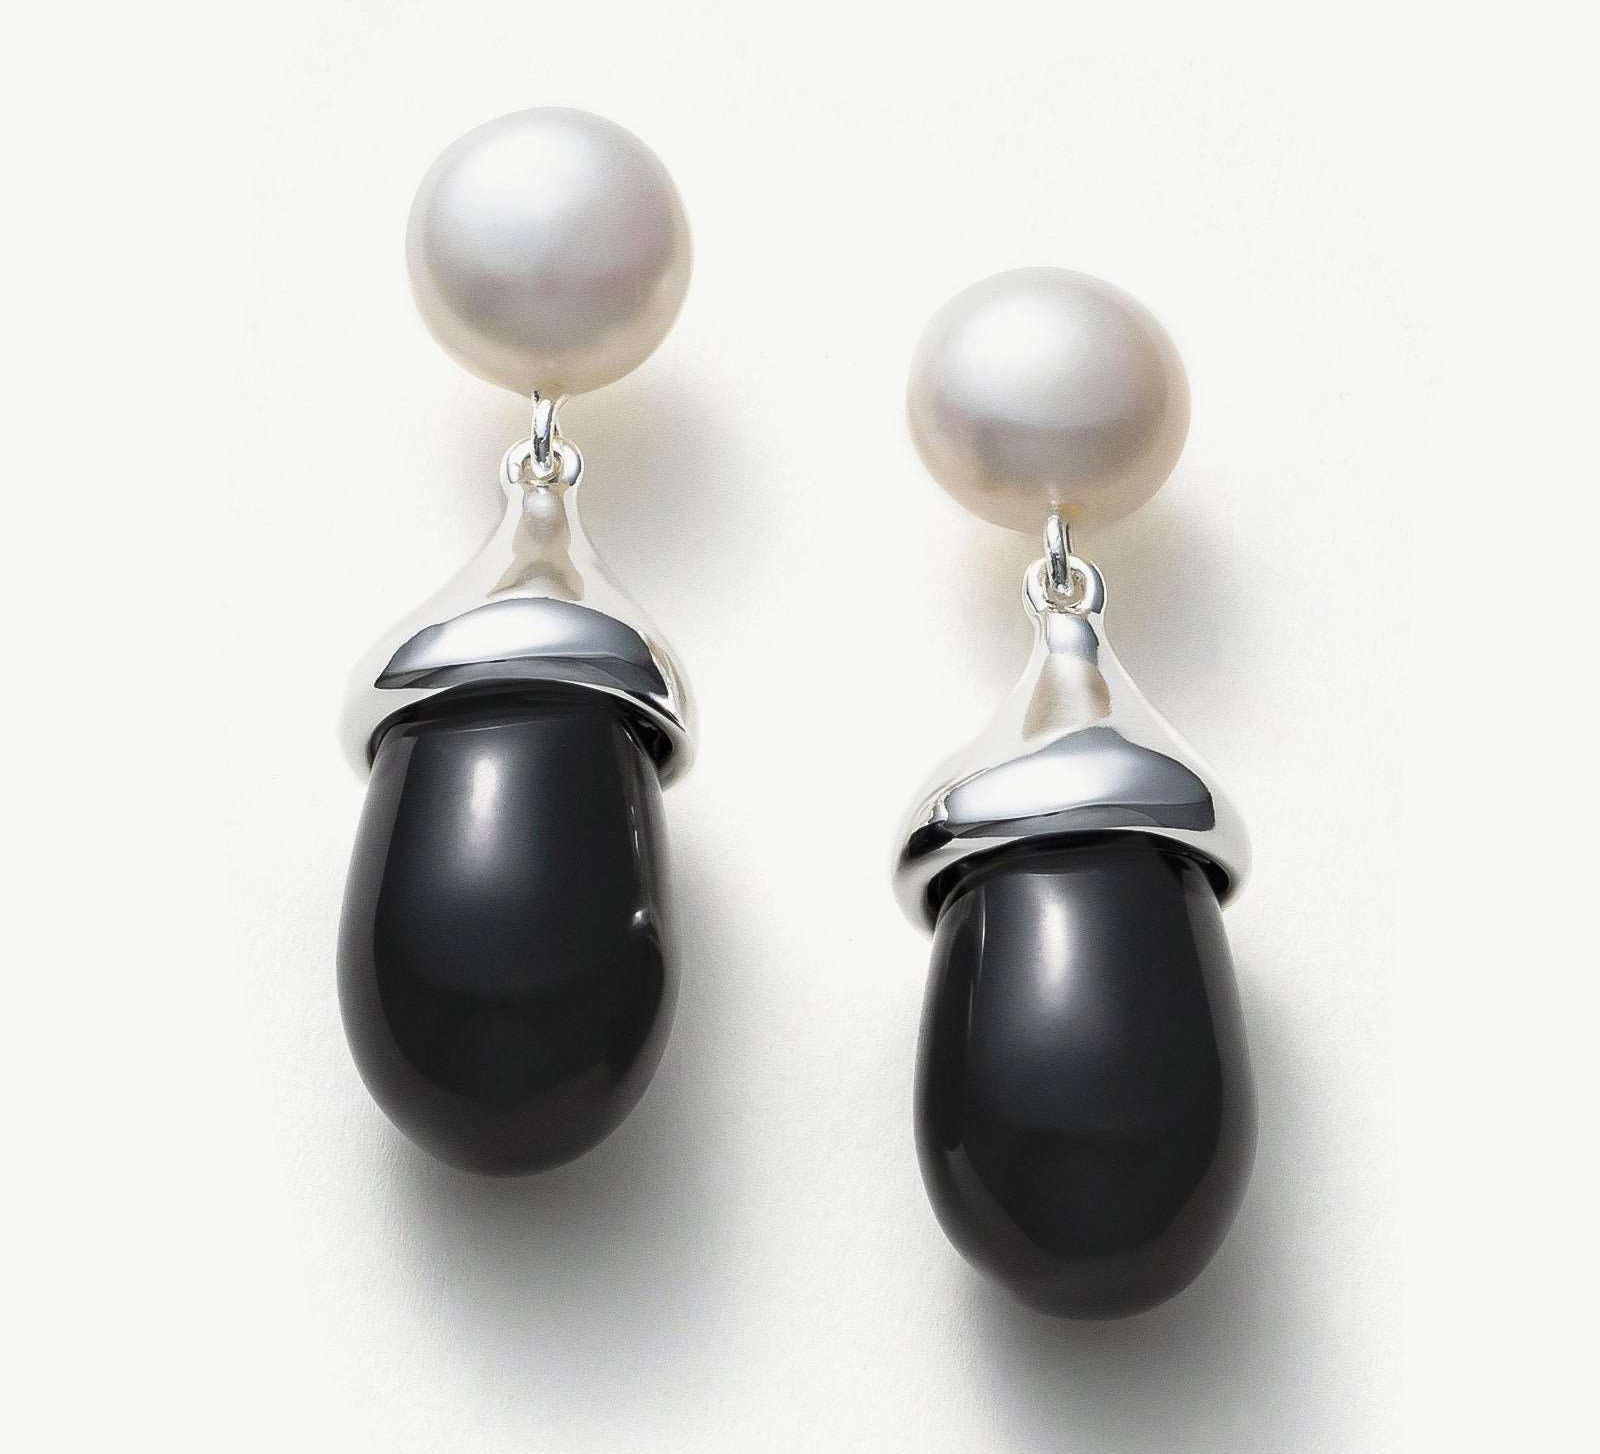 Stunning Silver and Black Agate Dangle Earrings with Delicate Pearl Drops